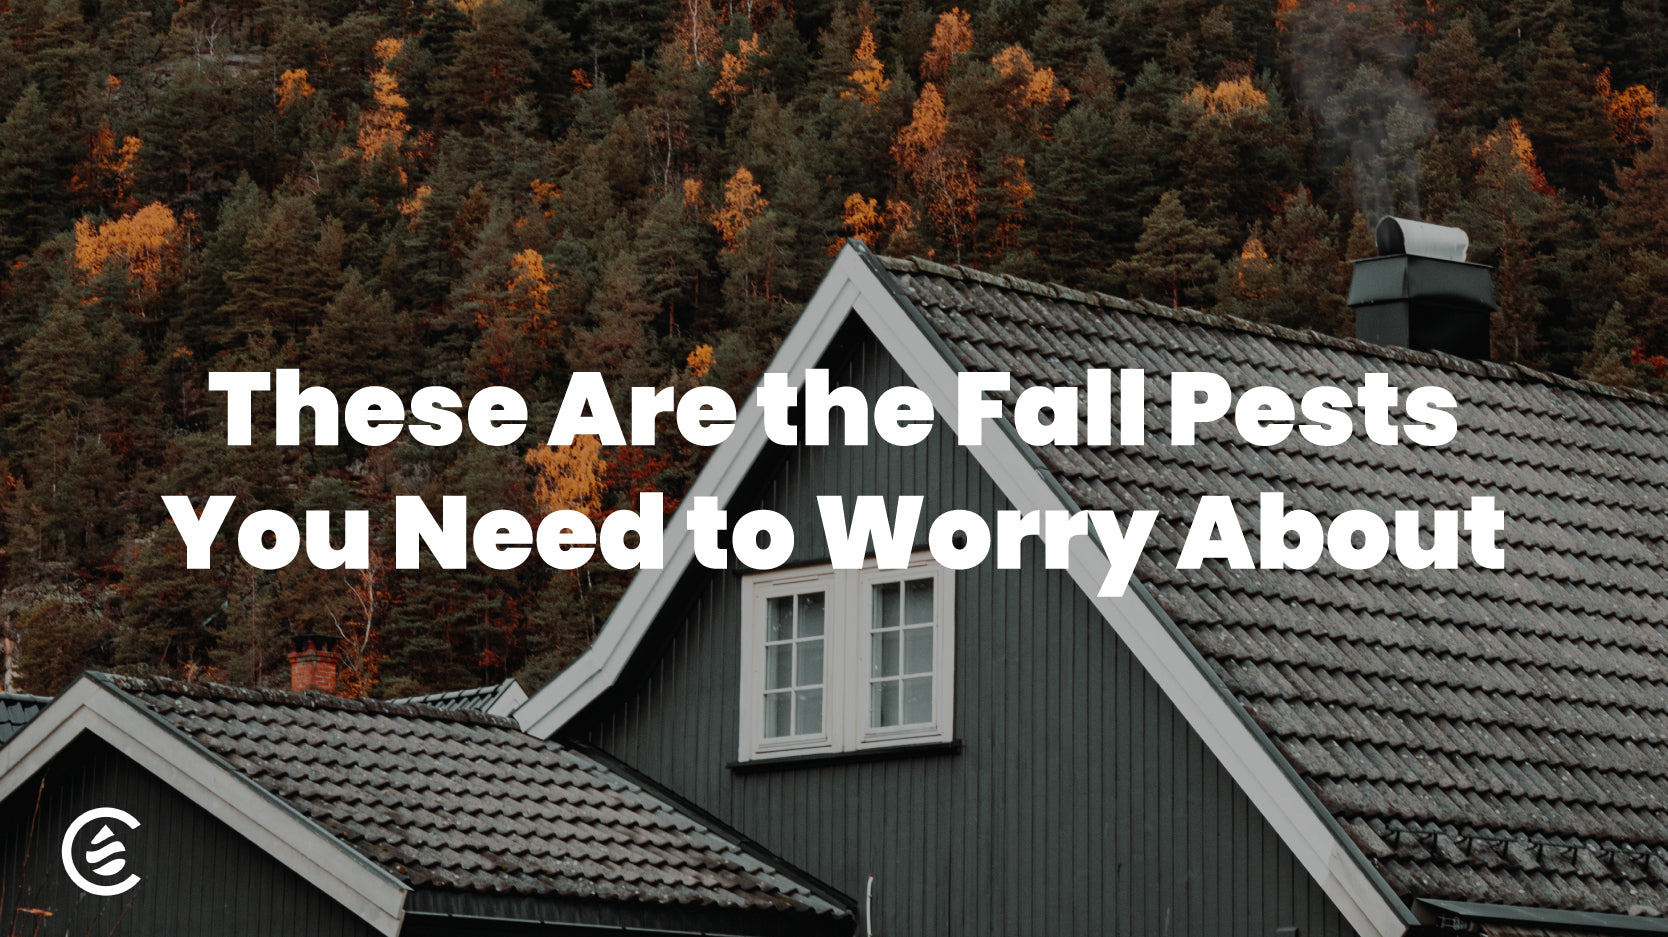 Cedarcide Blog Post Image, These Are the Fall Pests You Need to Worry About